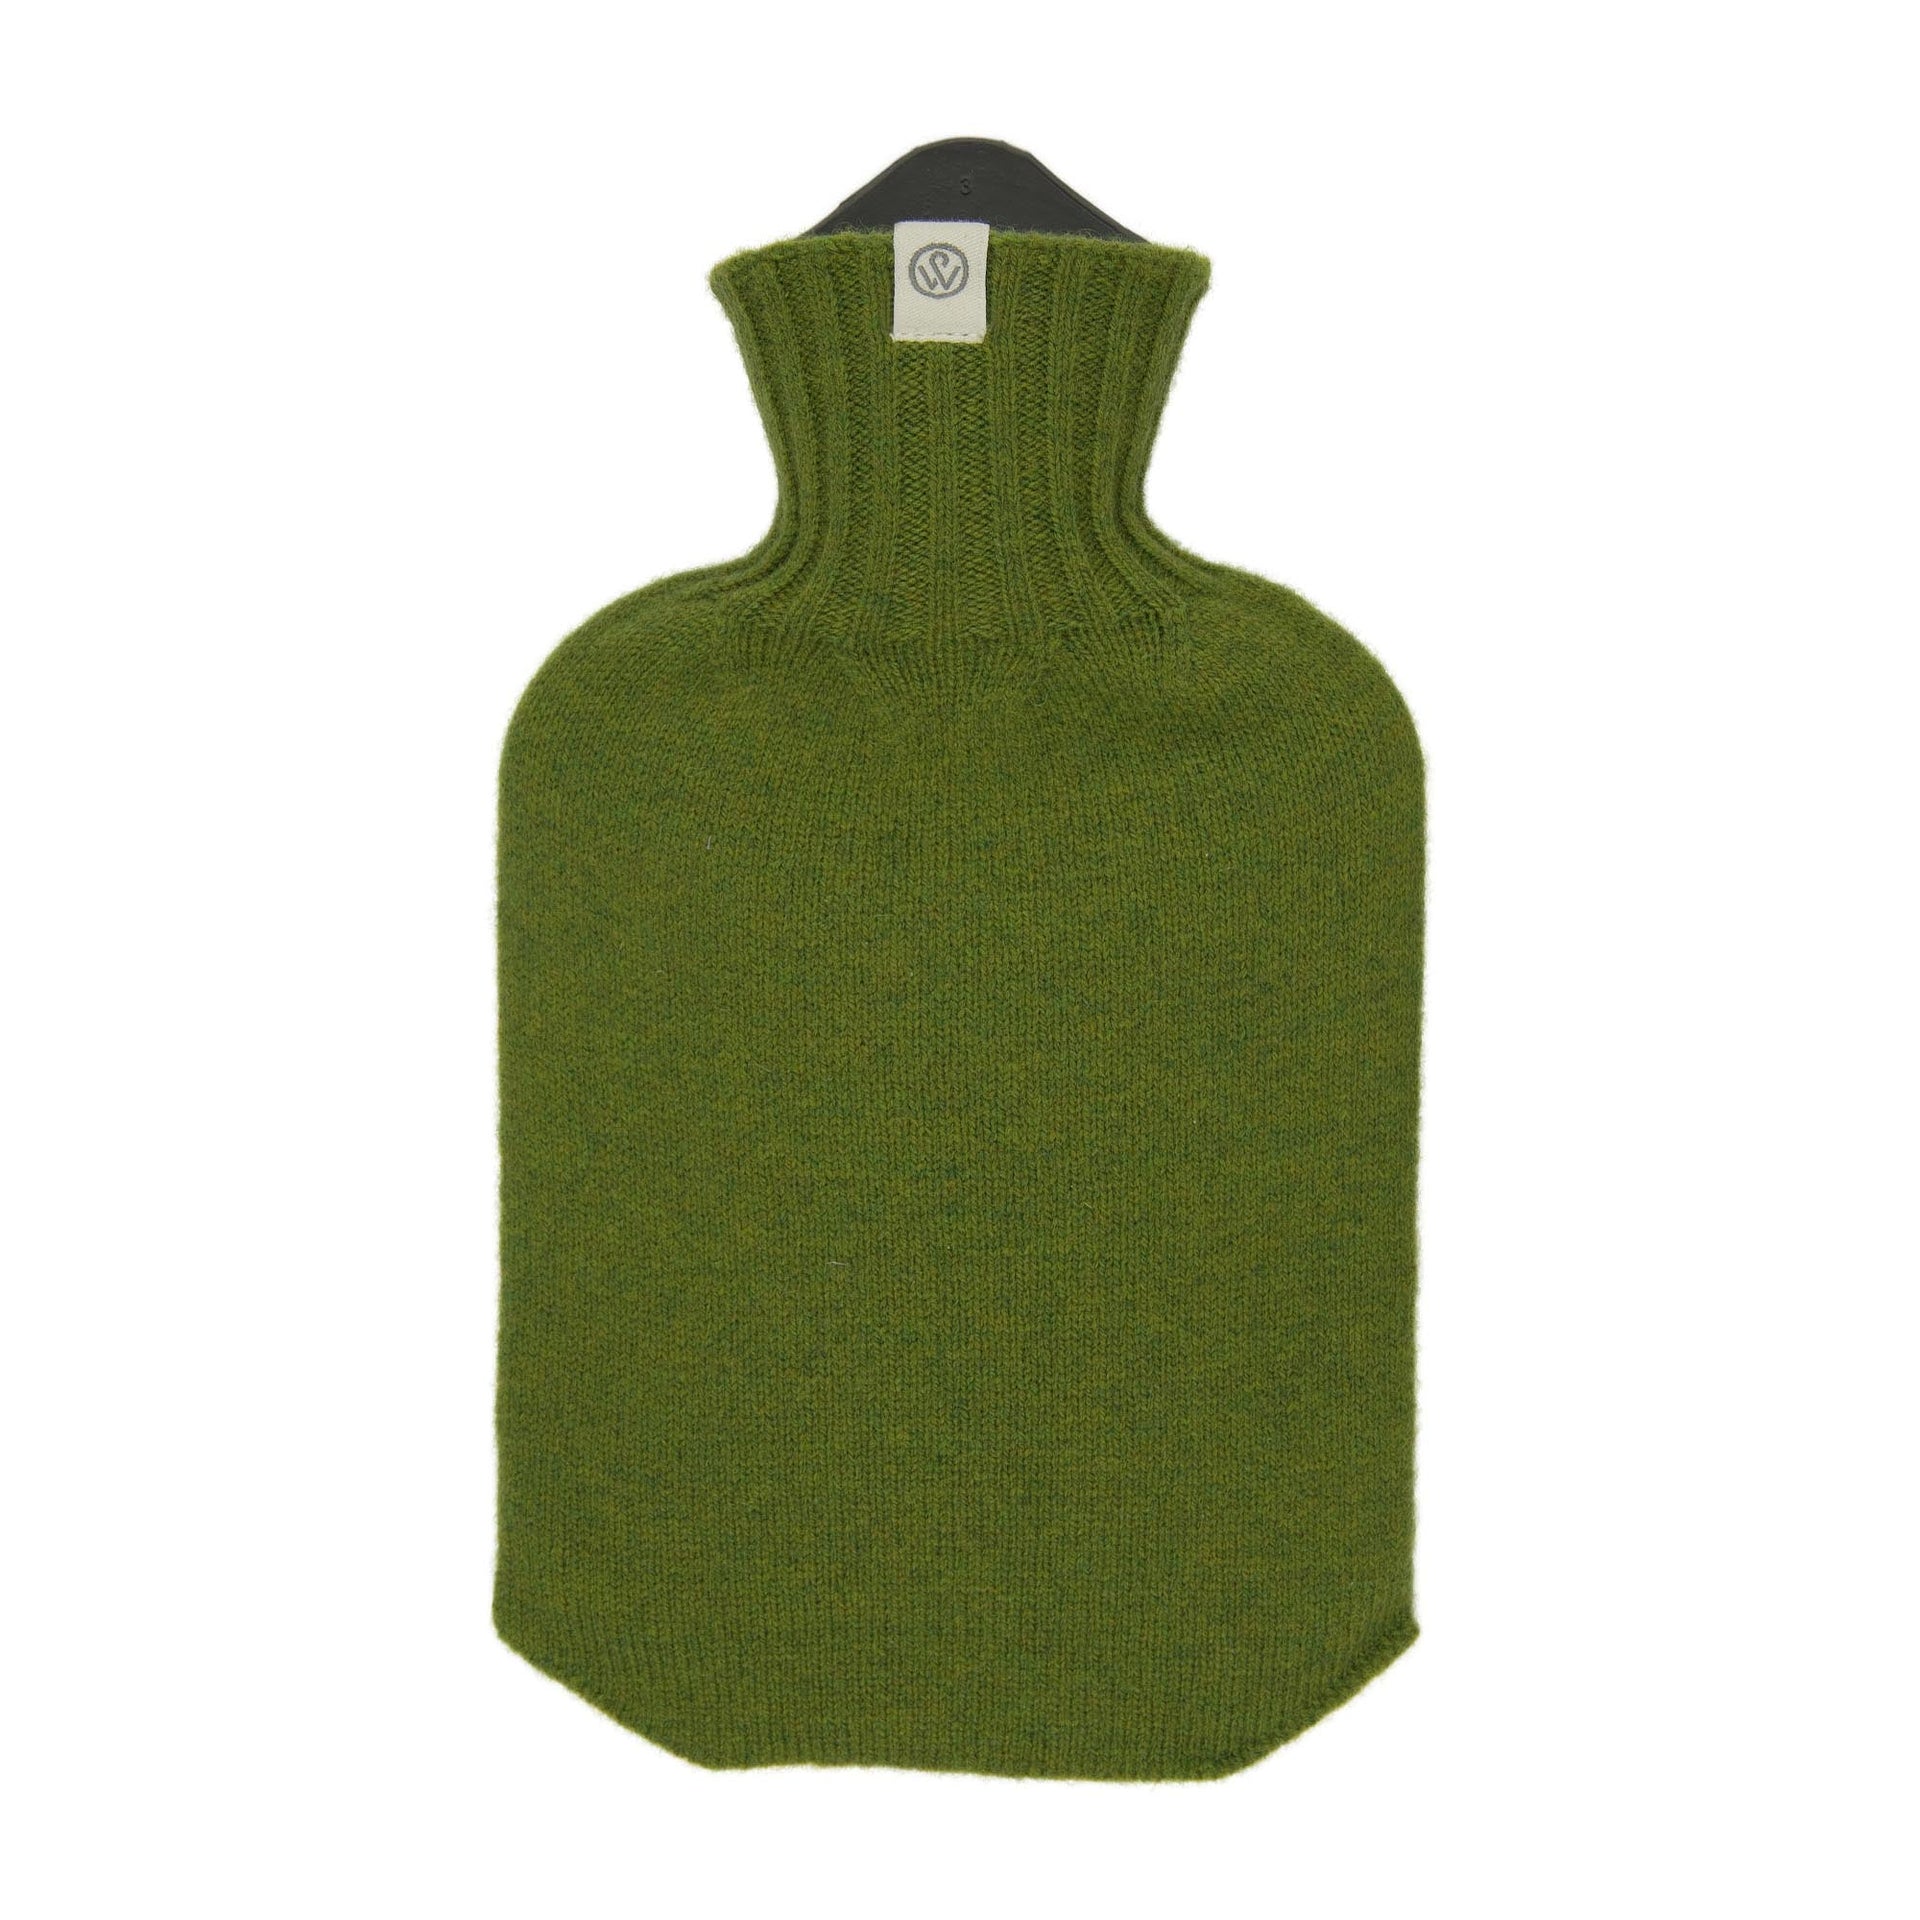 Lambswool Knit Mini Sustainable Hot Water Bottle Moss Green - Made Scotland